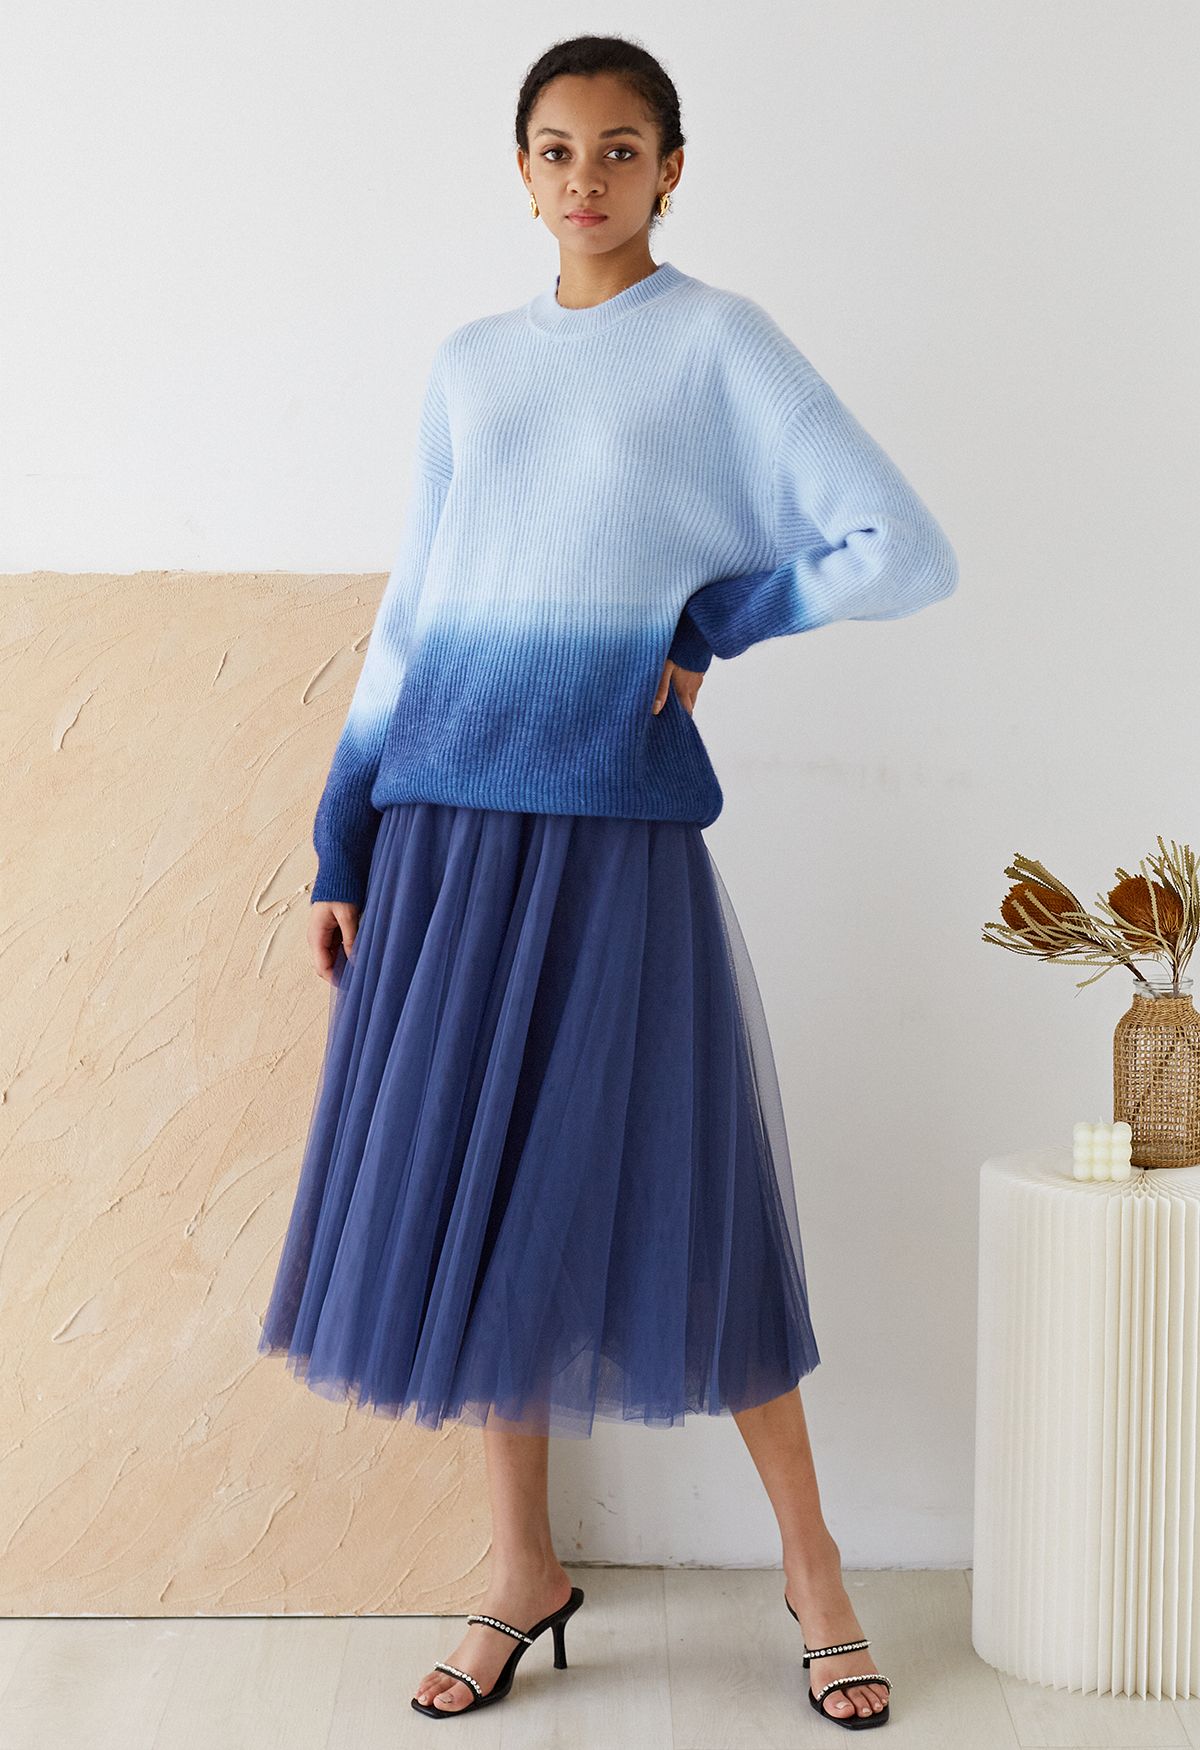 Ombre Round Neck Rib Knit Sweater in Blue